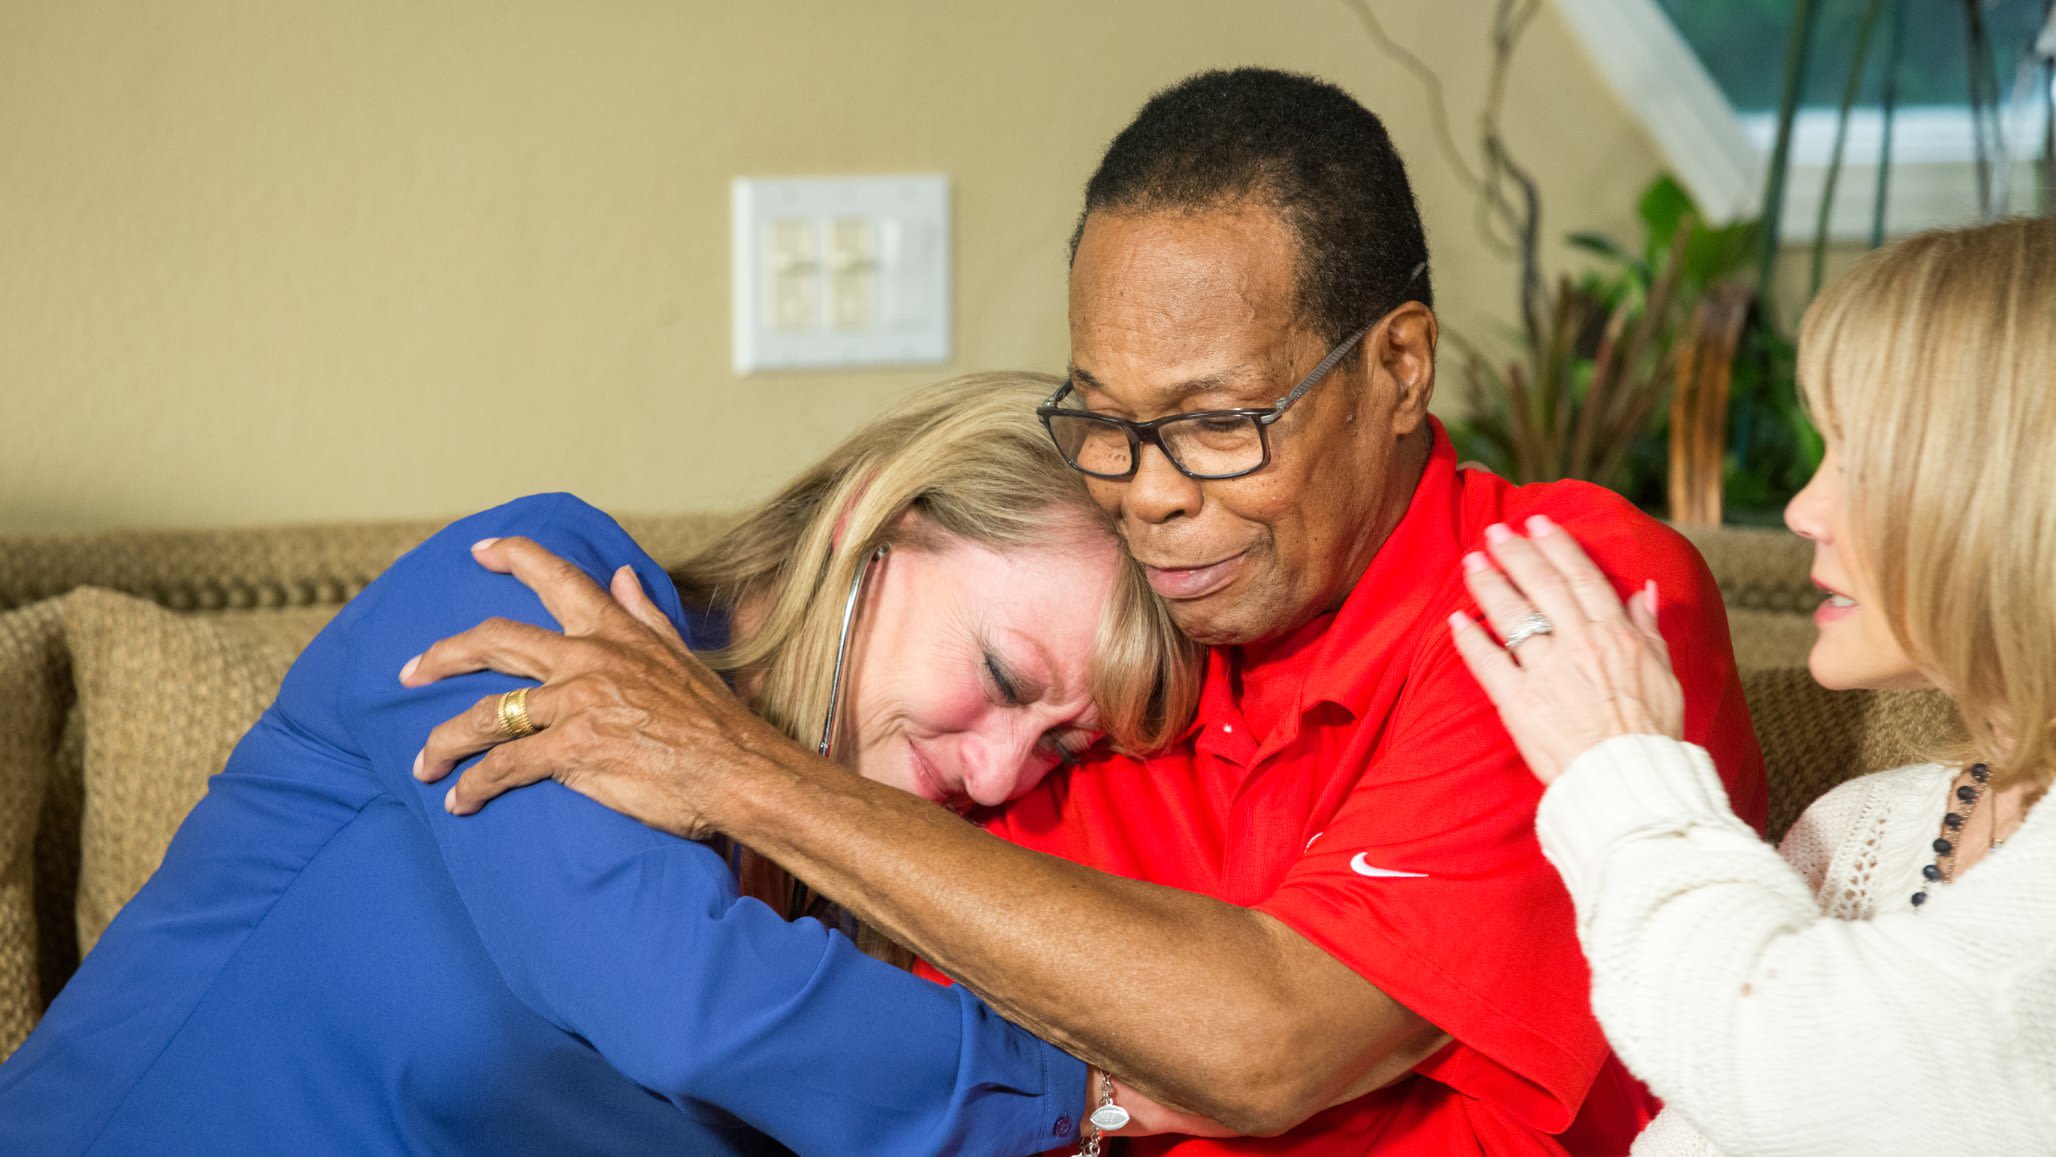 MLB legend Rod Carew saved by heart from NFL player who died at 29